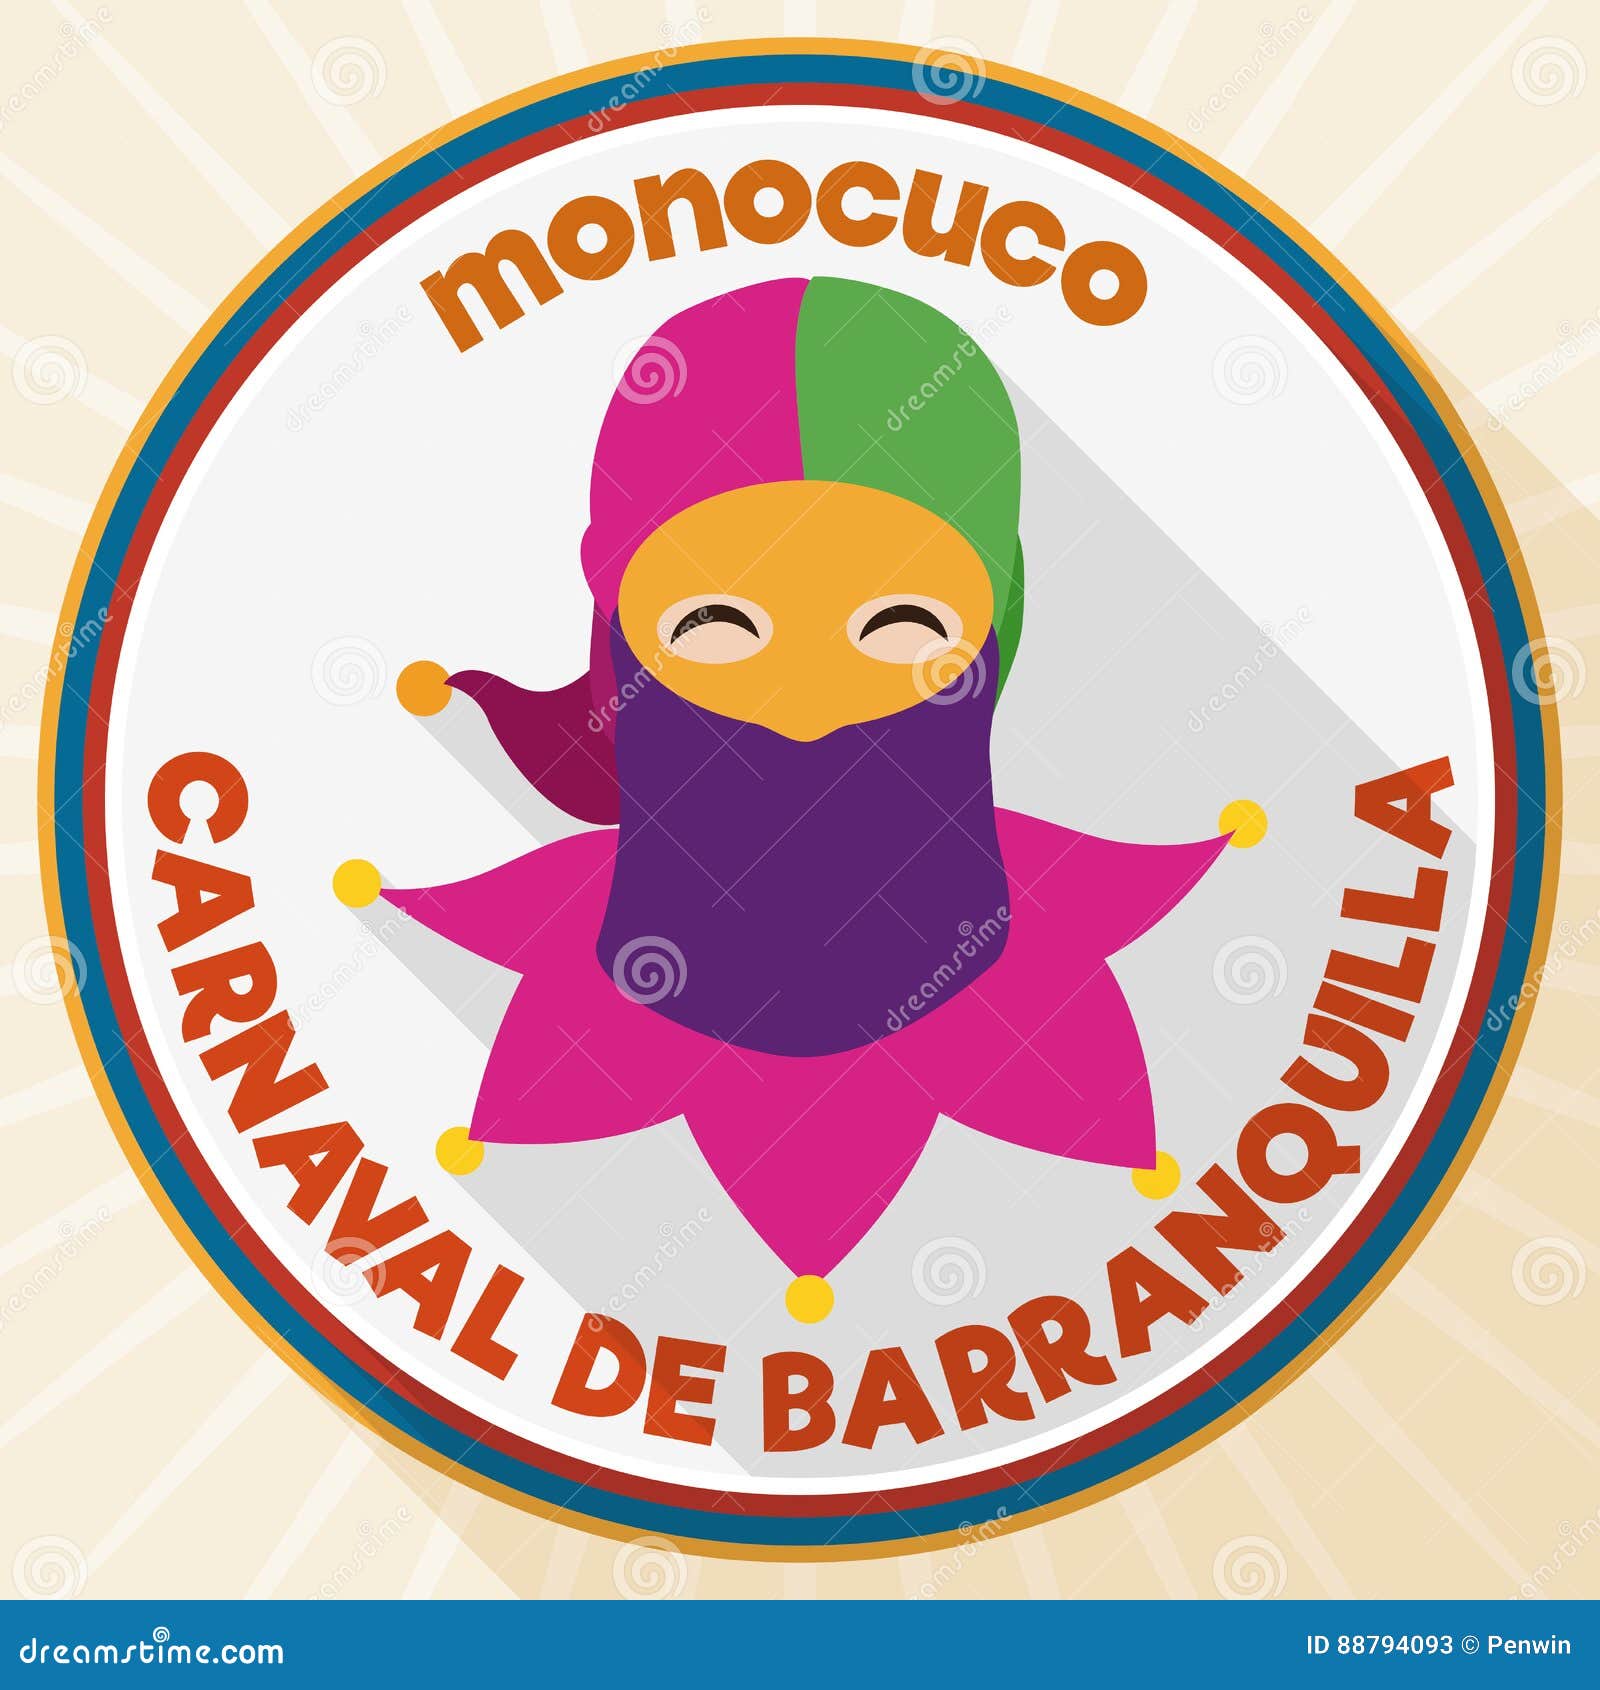 round button with monocuco  for barranquilla`s carnival celebration,  